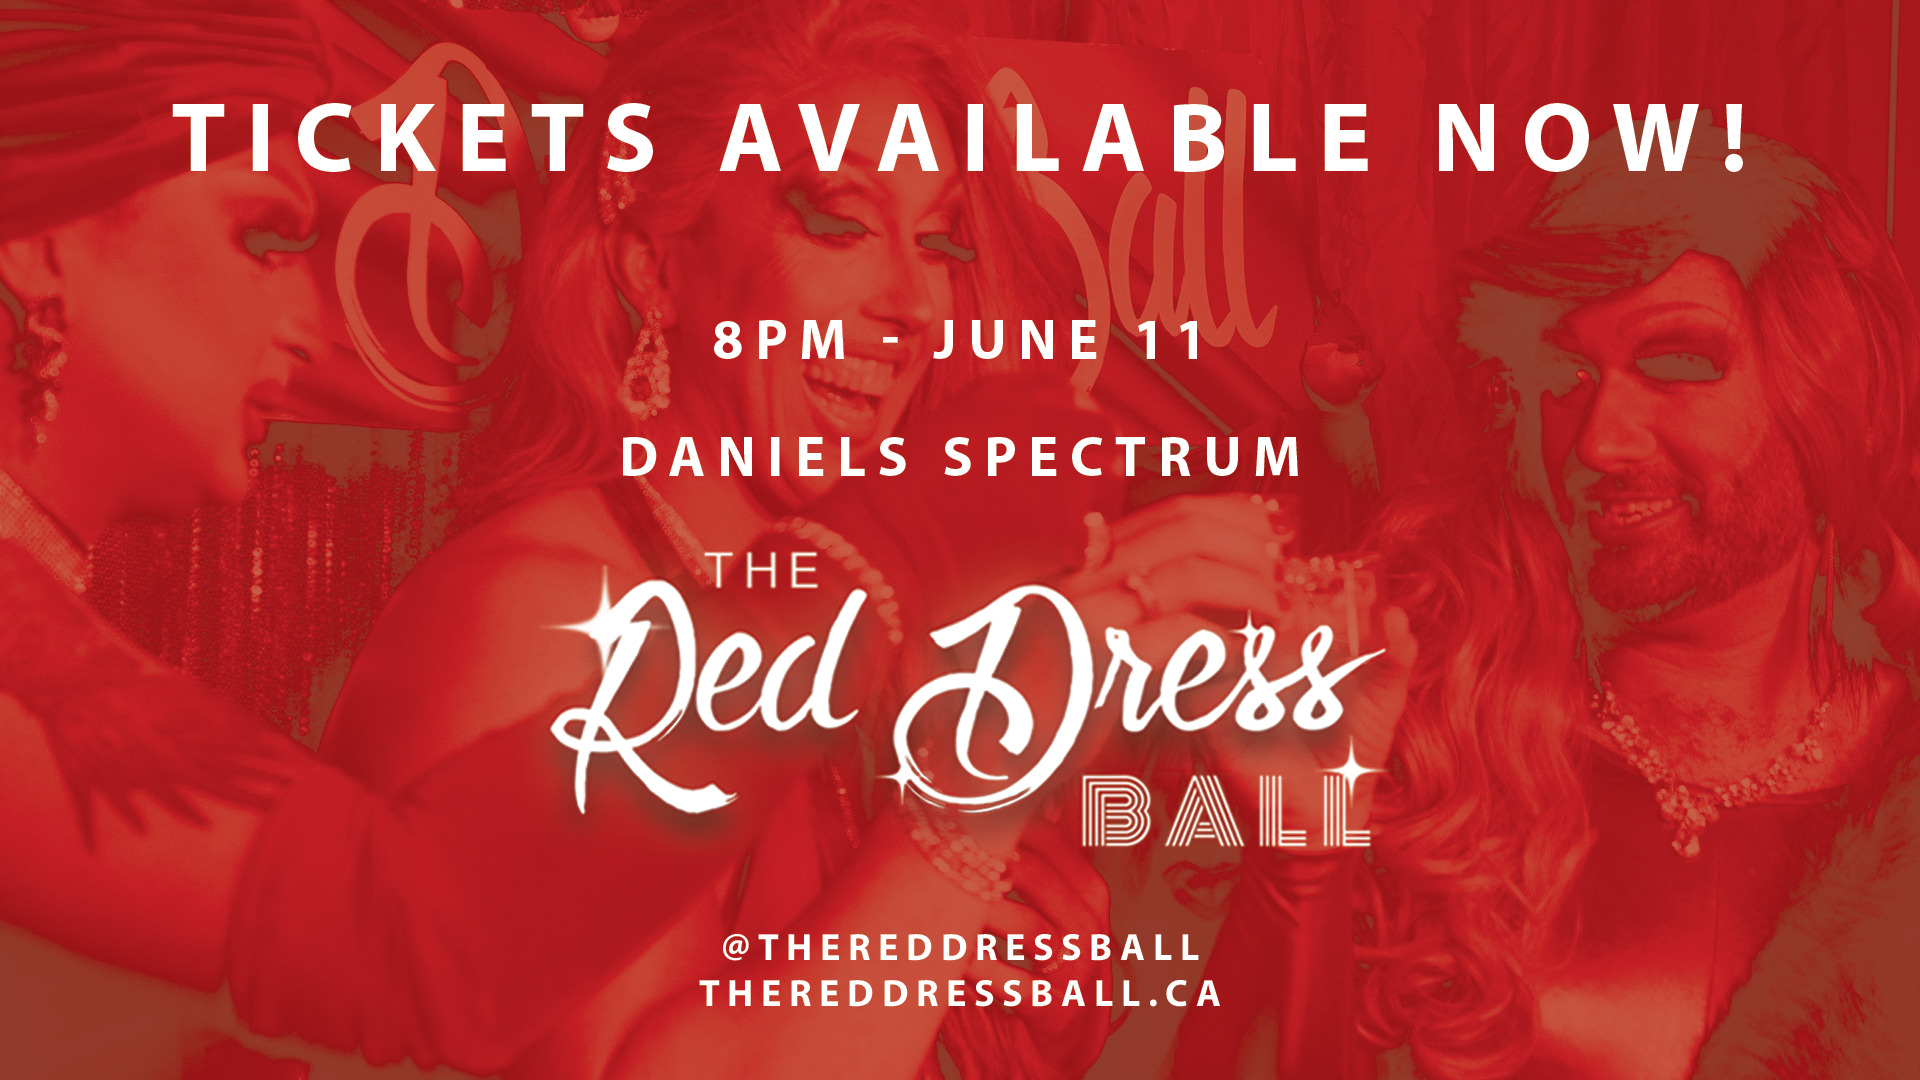 The Red Dress Ball